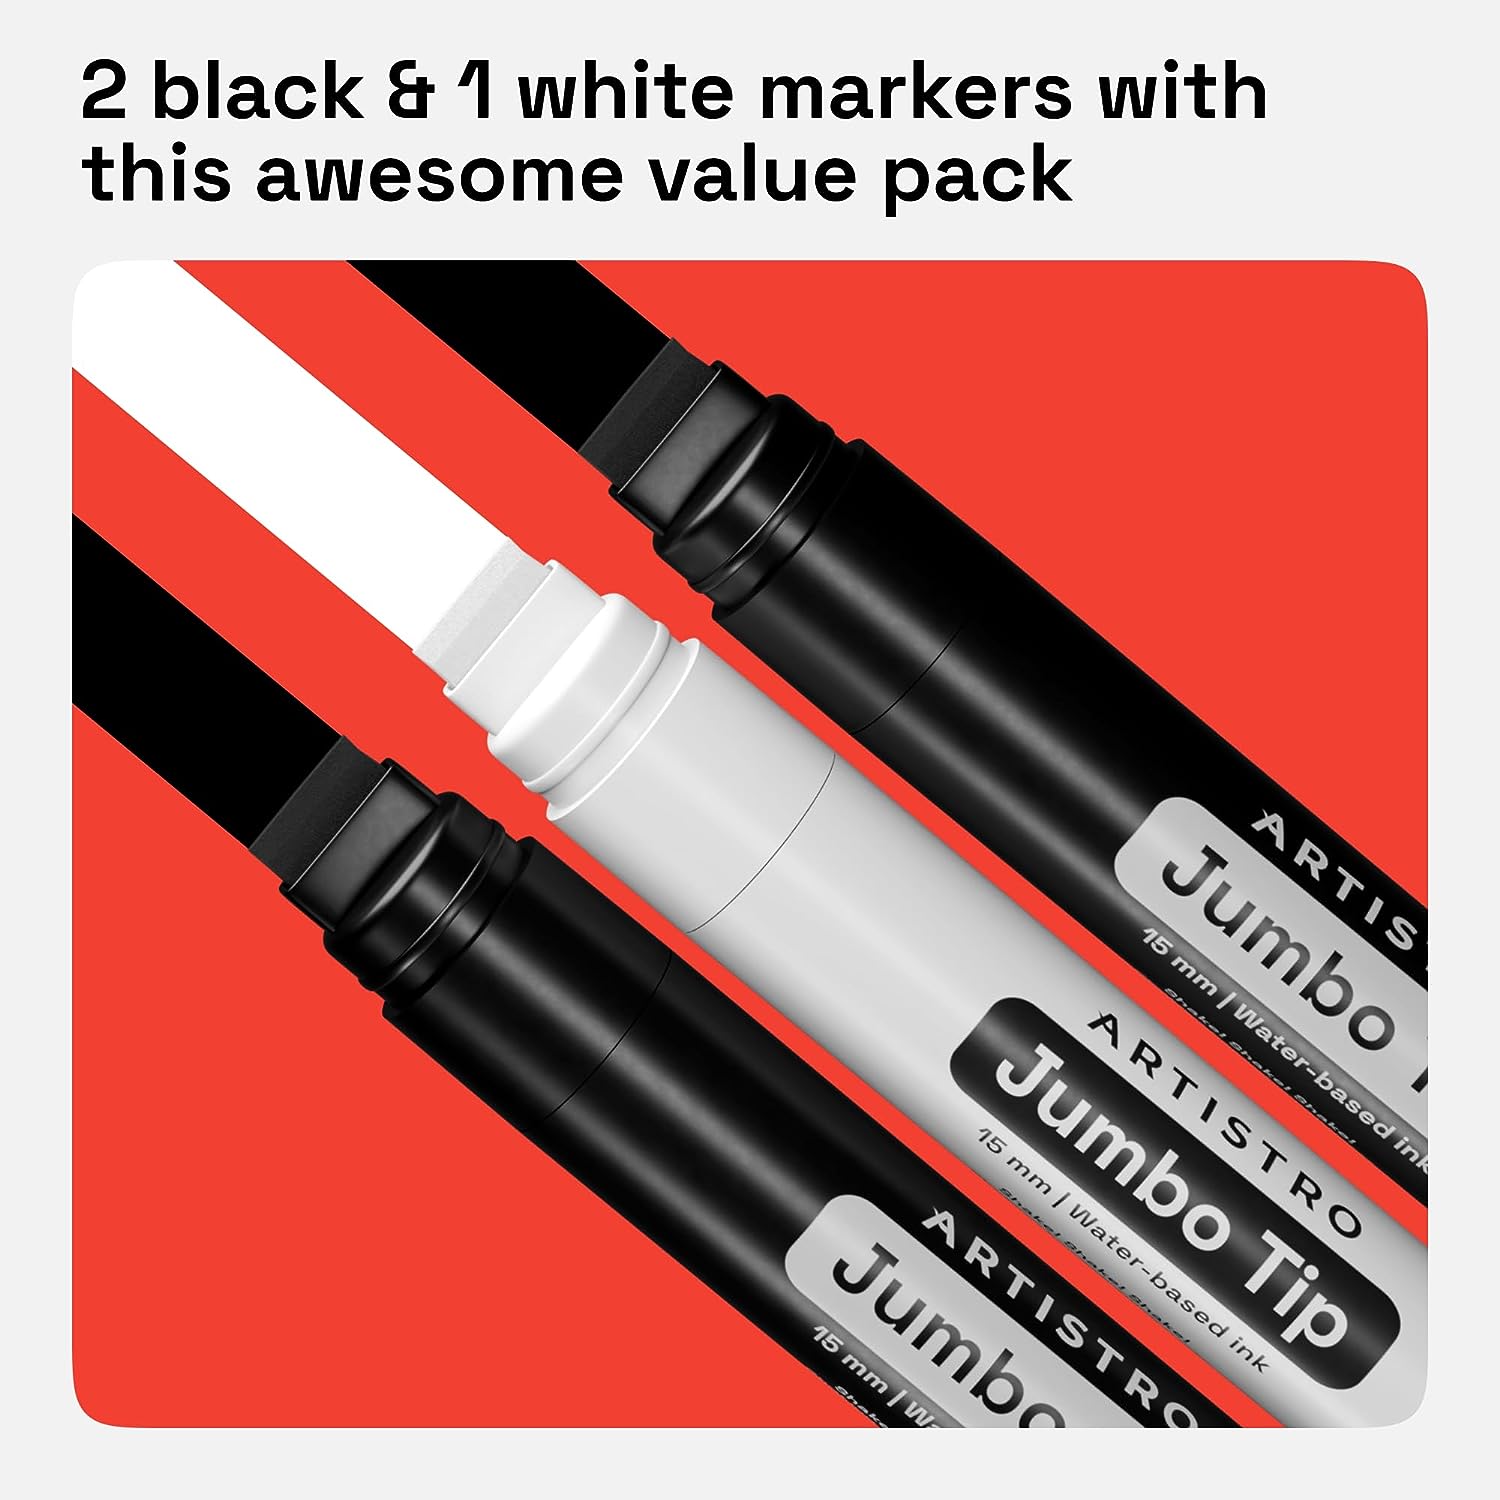 2 black & 1 white markers with this awesome value pack